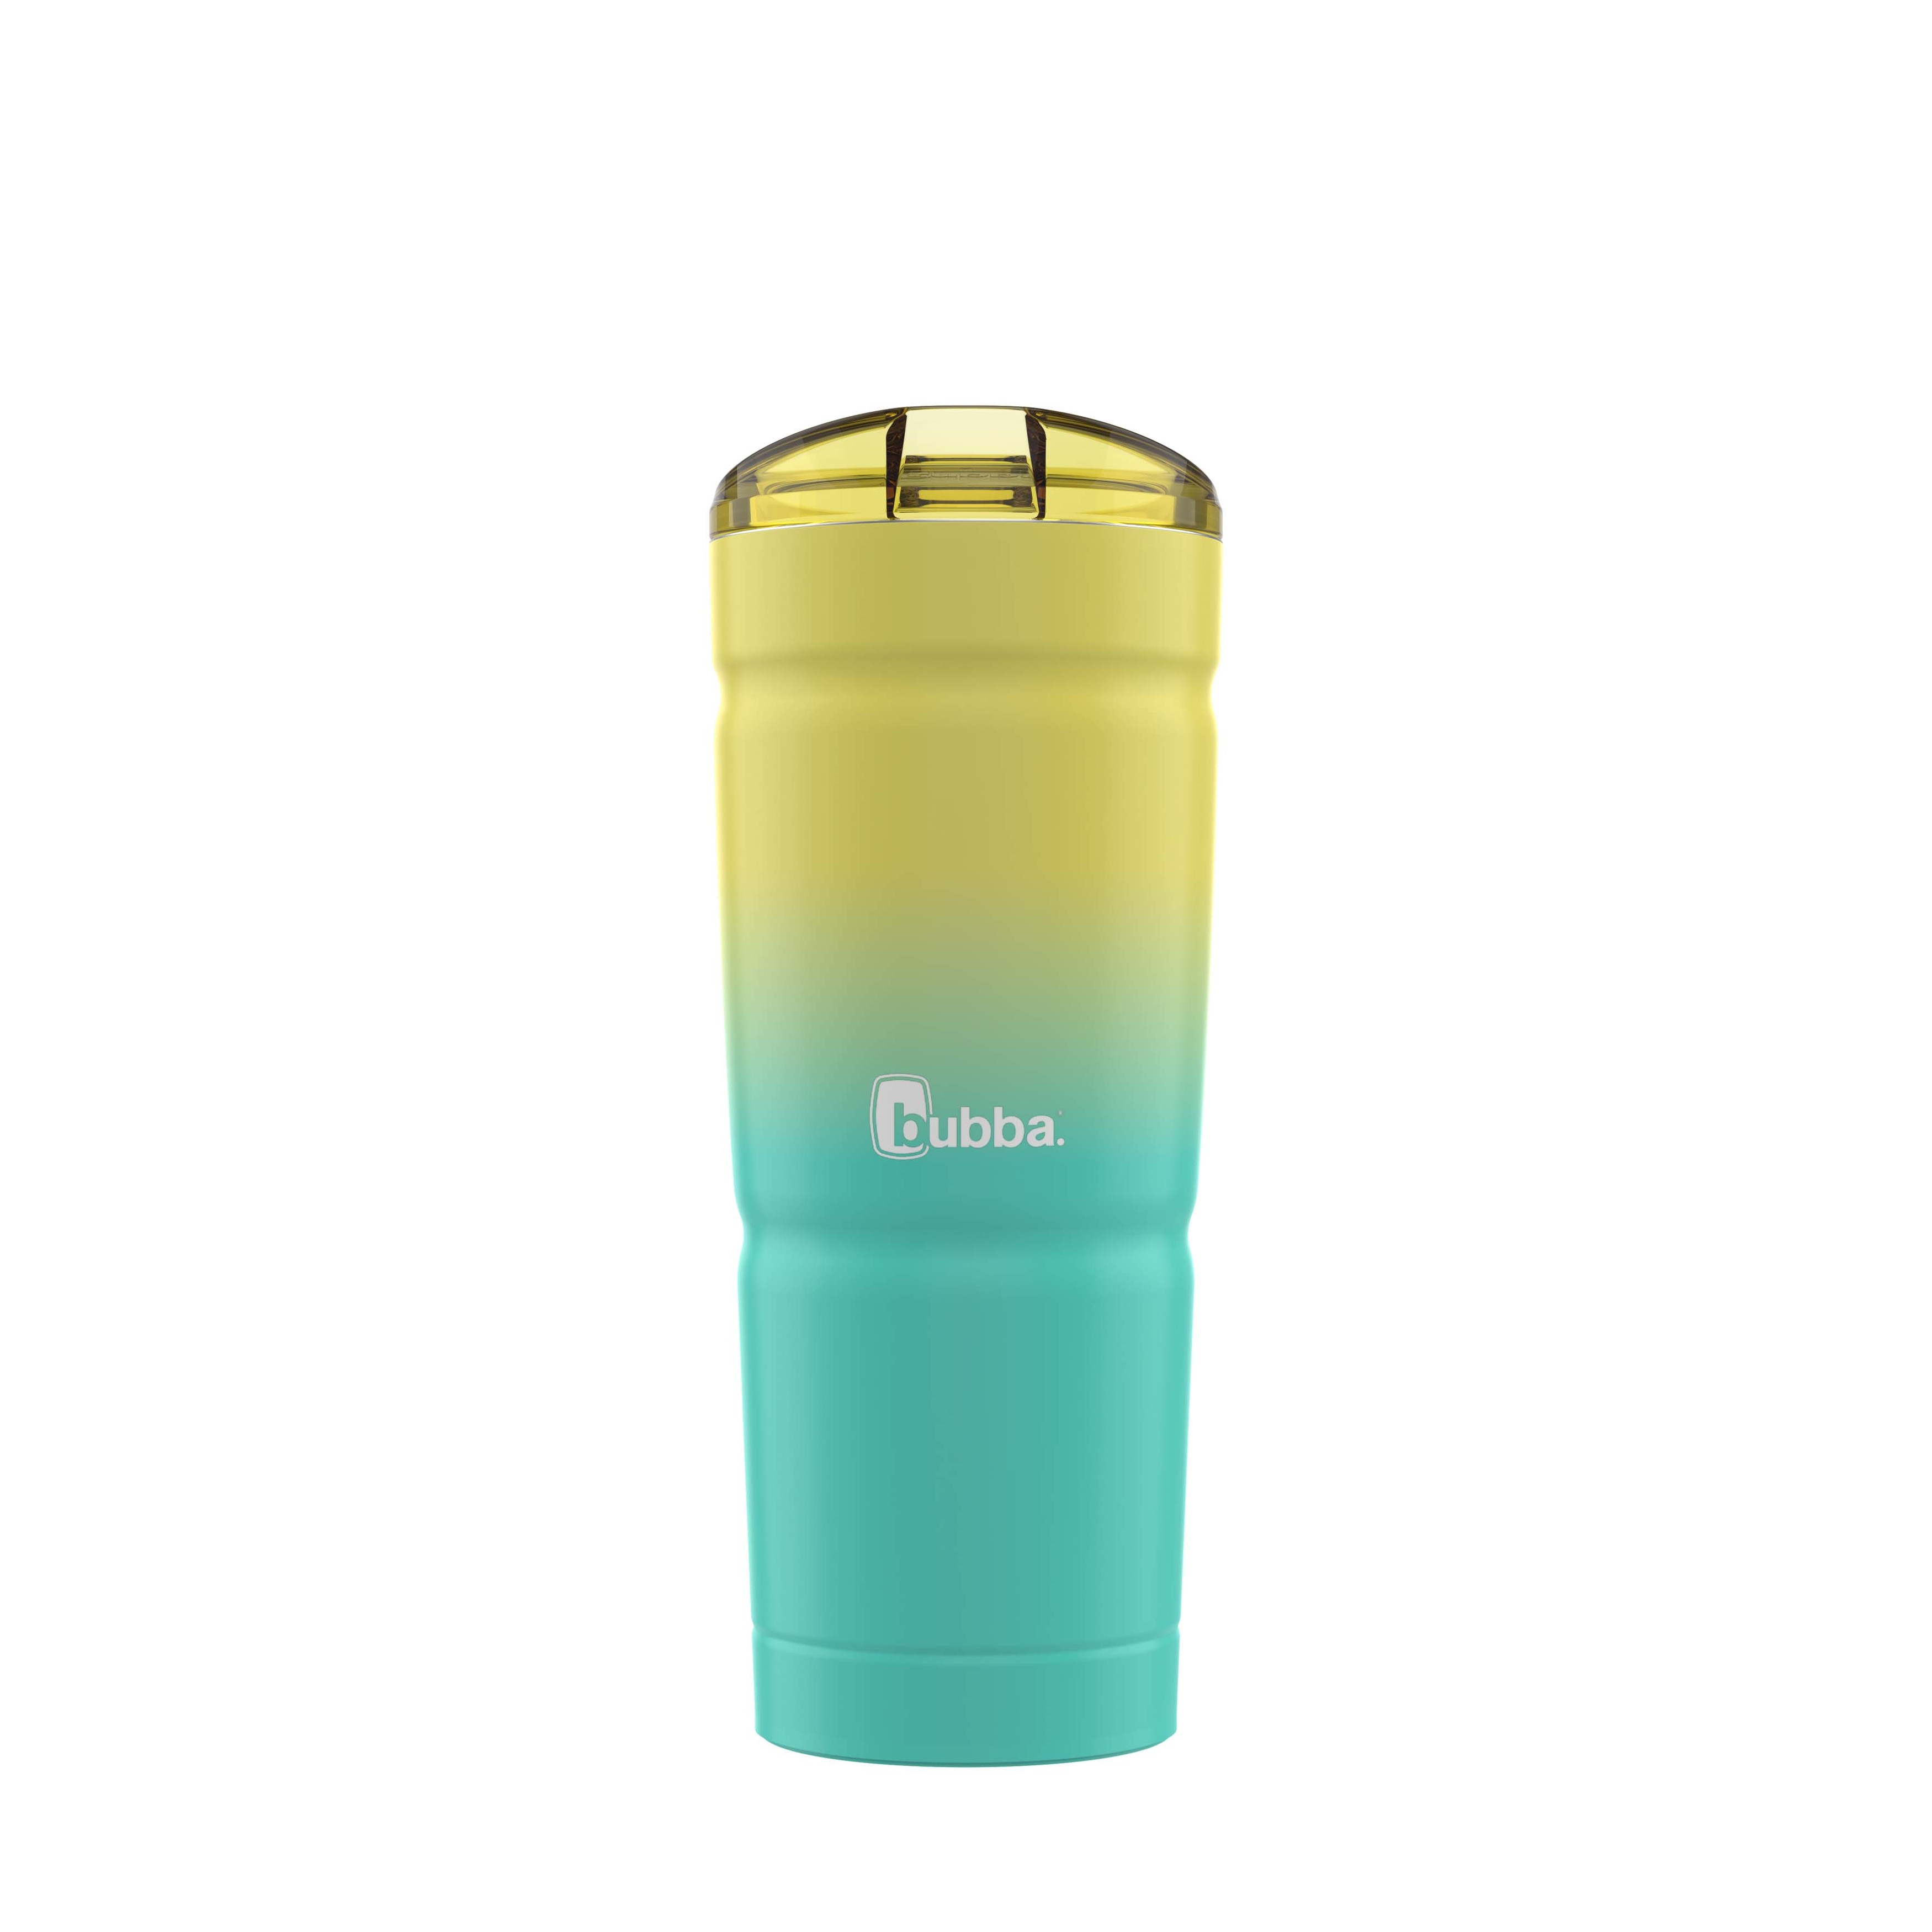 bubba Envy S Insulated Stainless Steel Tumbler with Straw, 24 Oz., Ombre - image 4 of 6